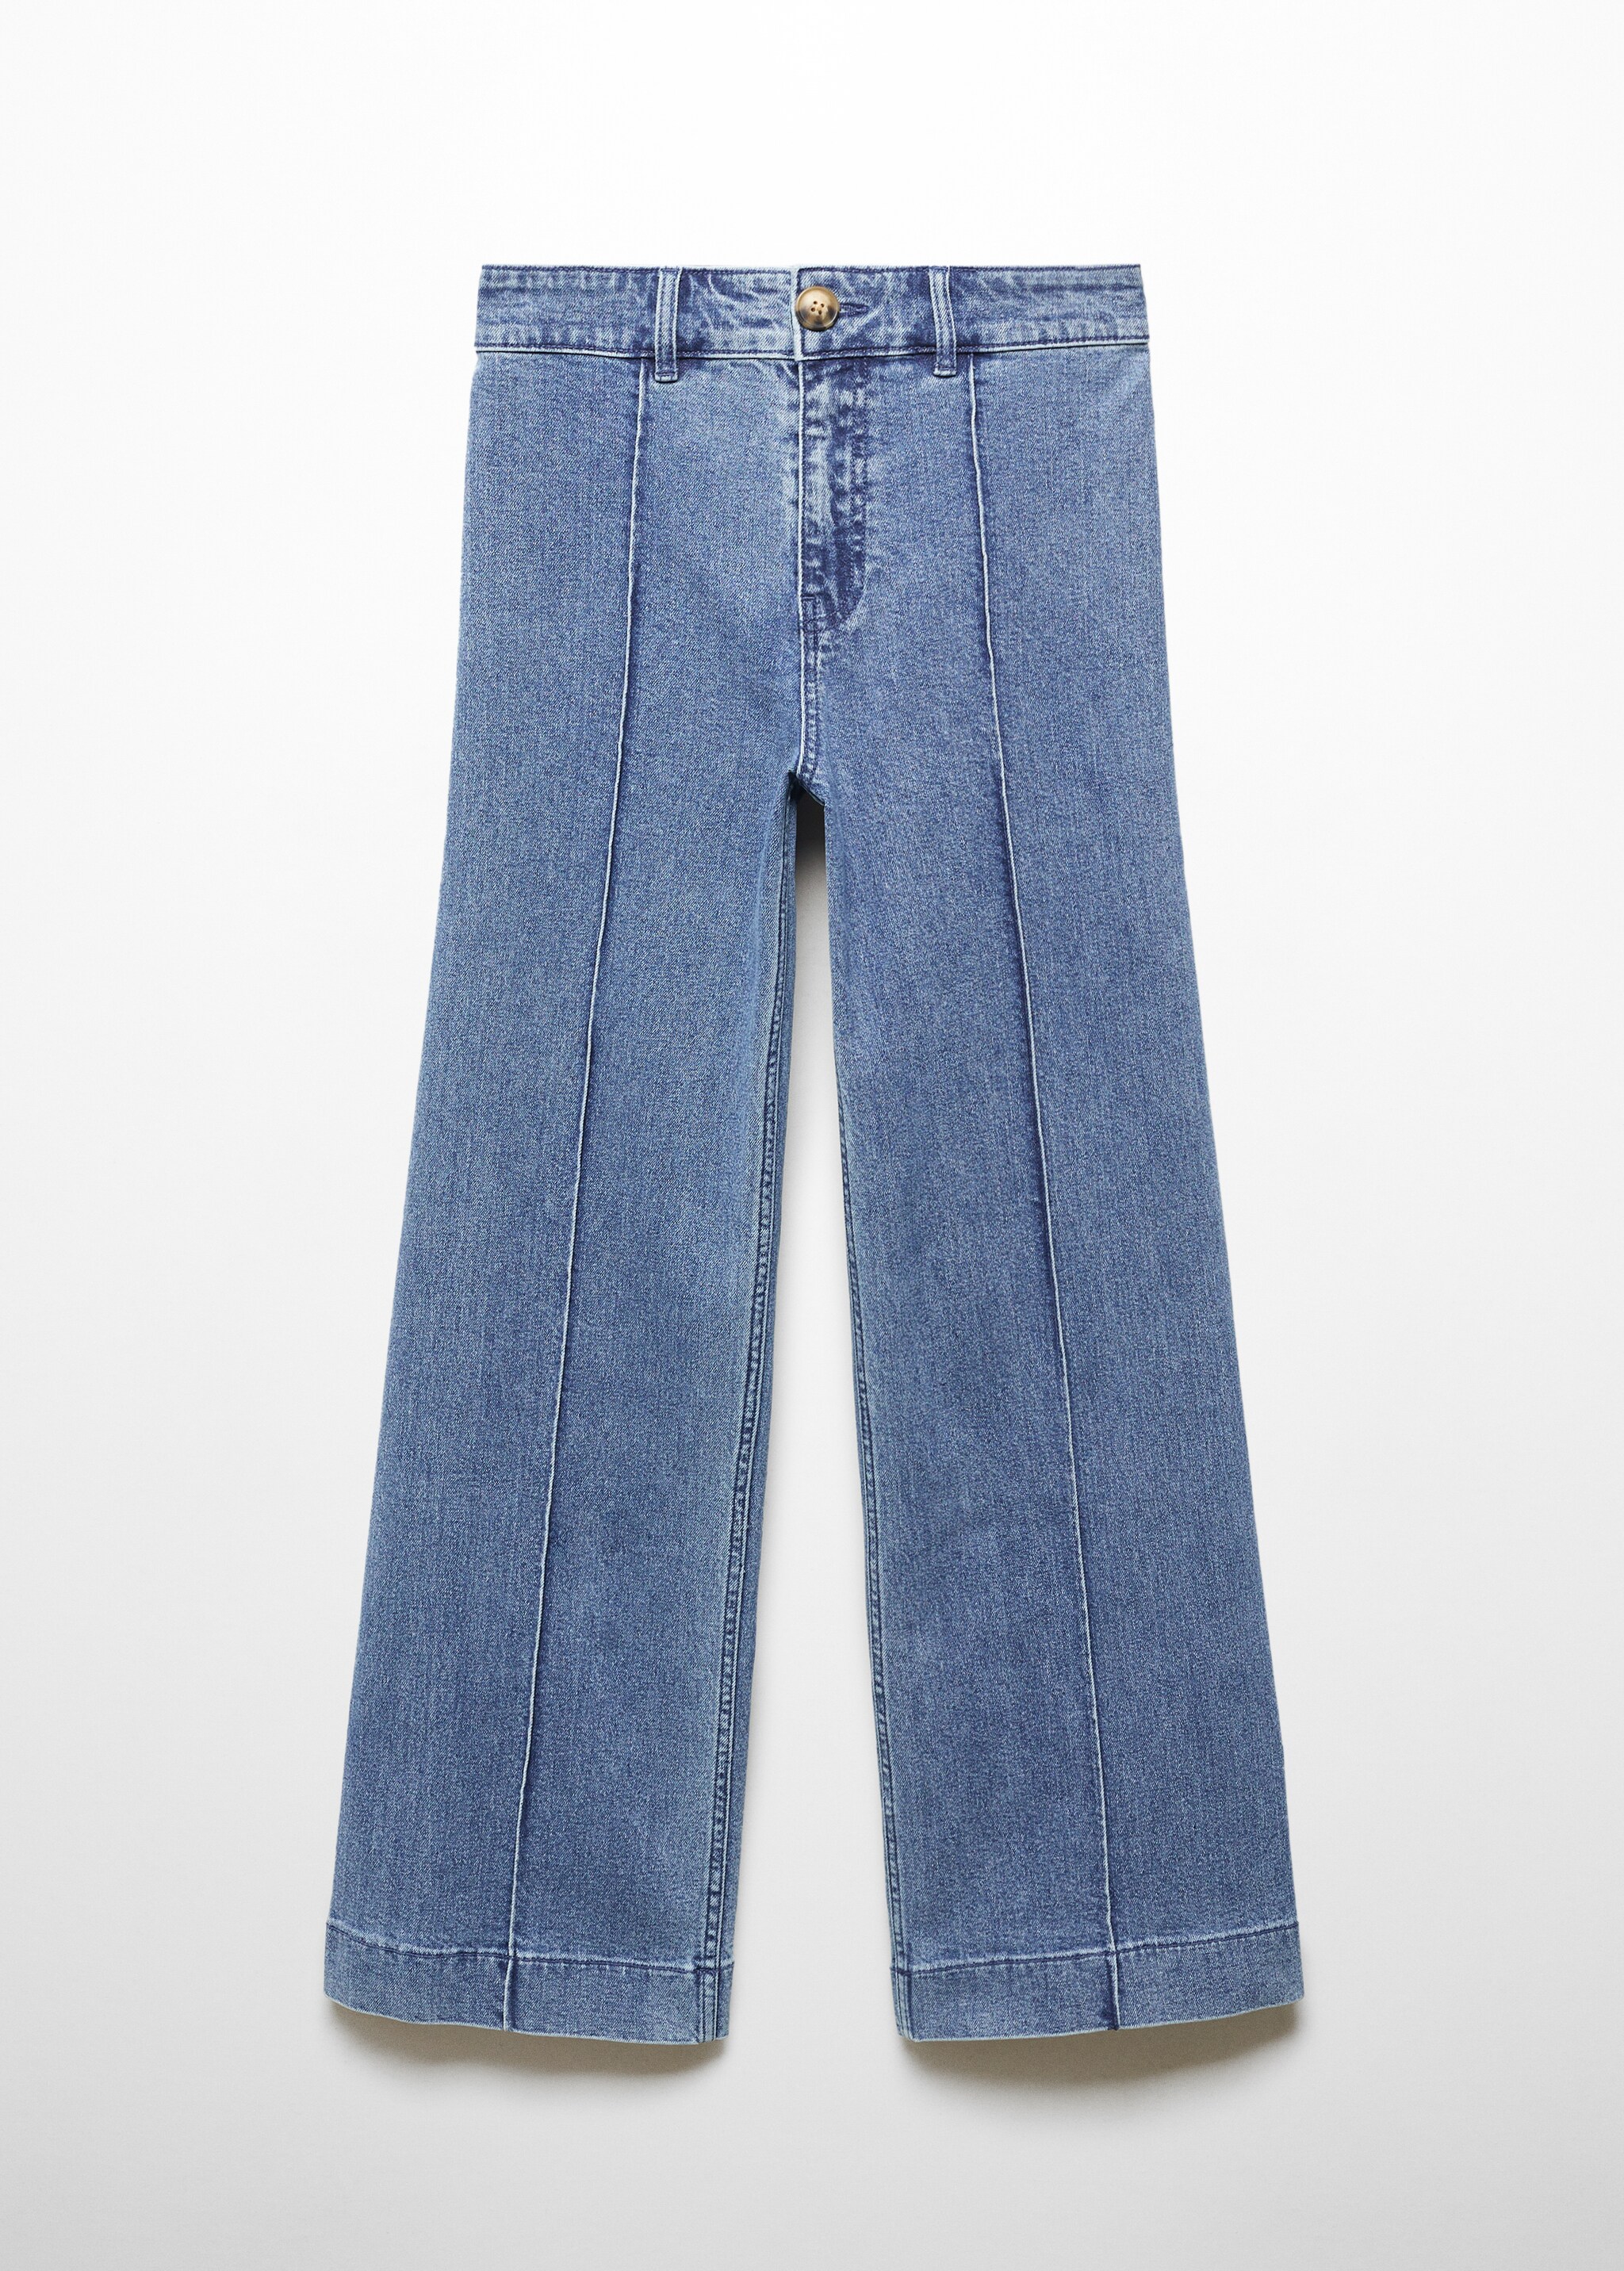 Wideleg jeans with decorative seams - Article without model